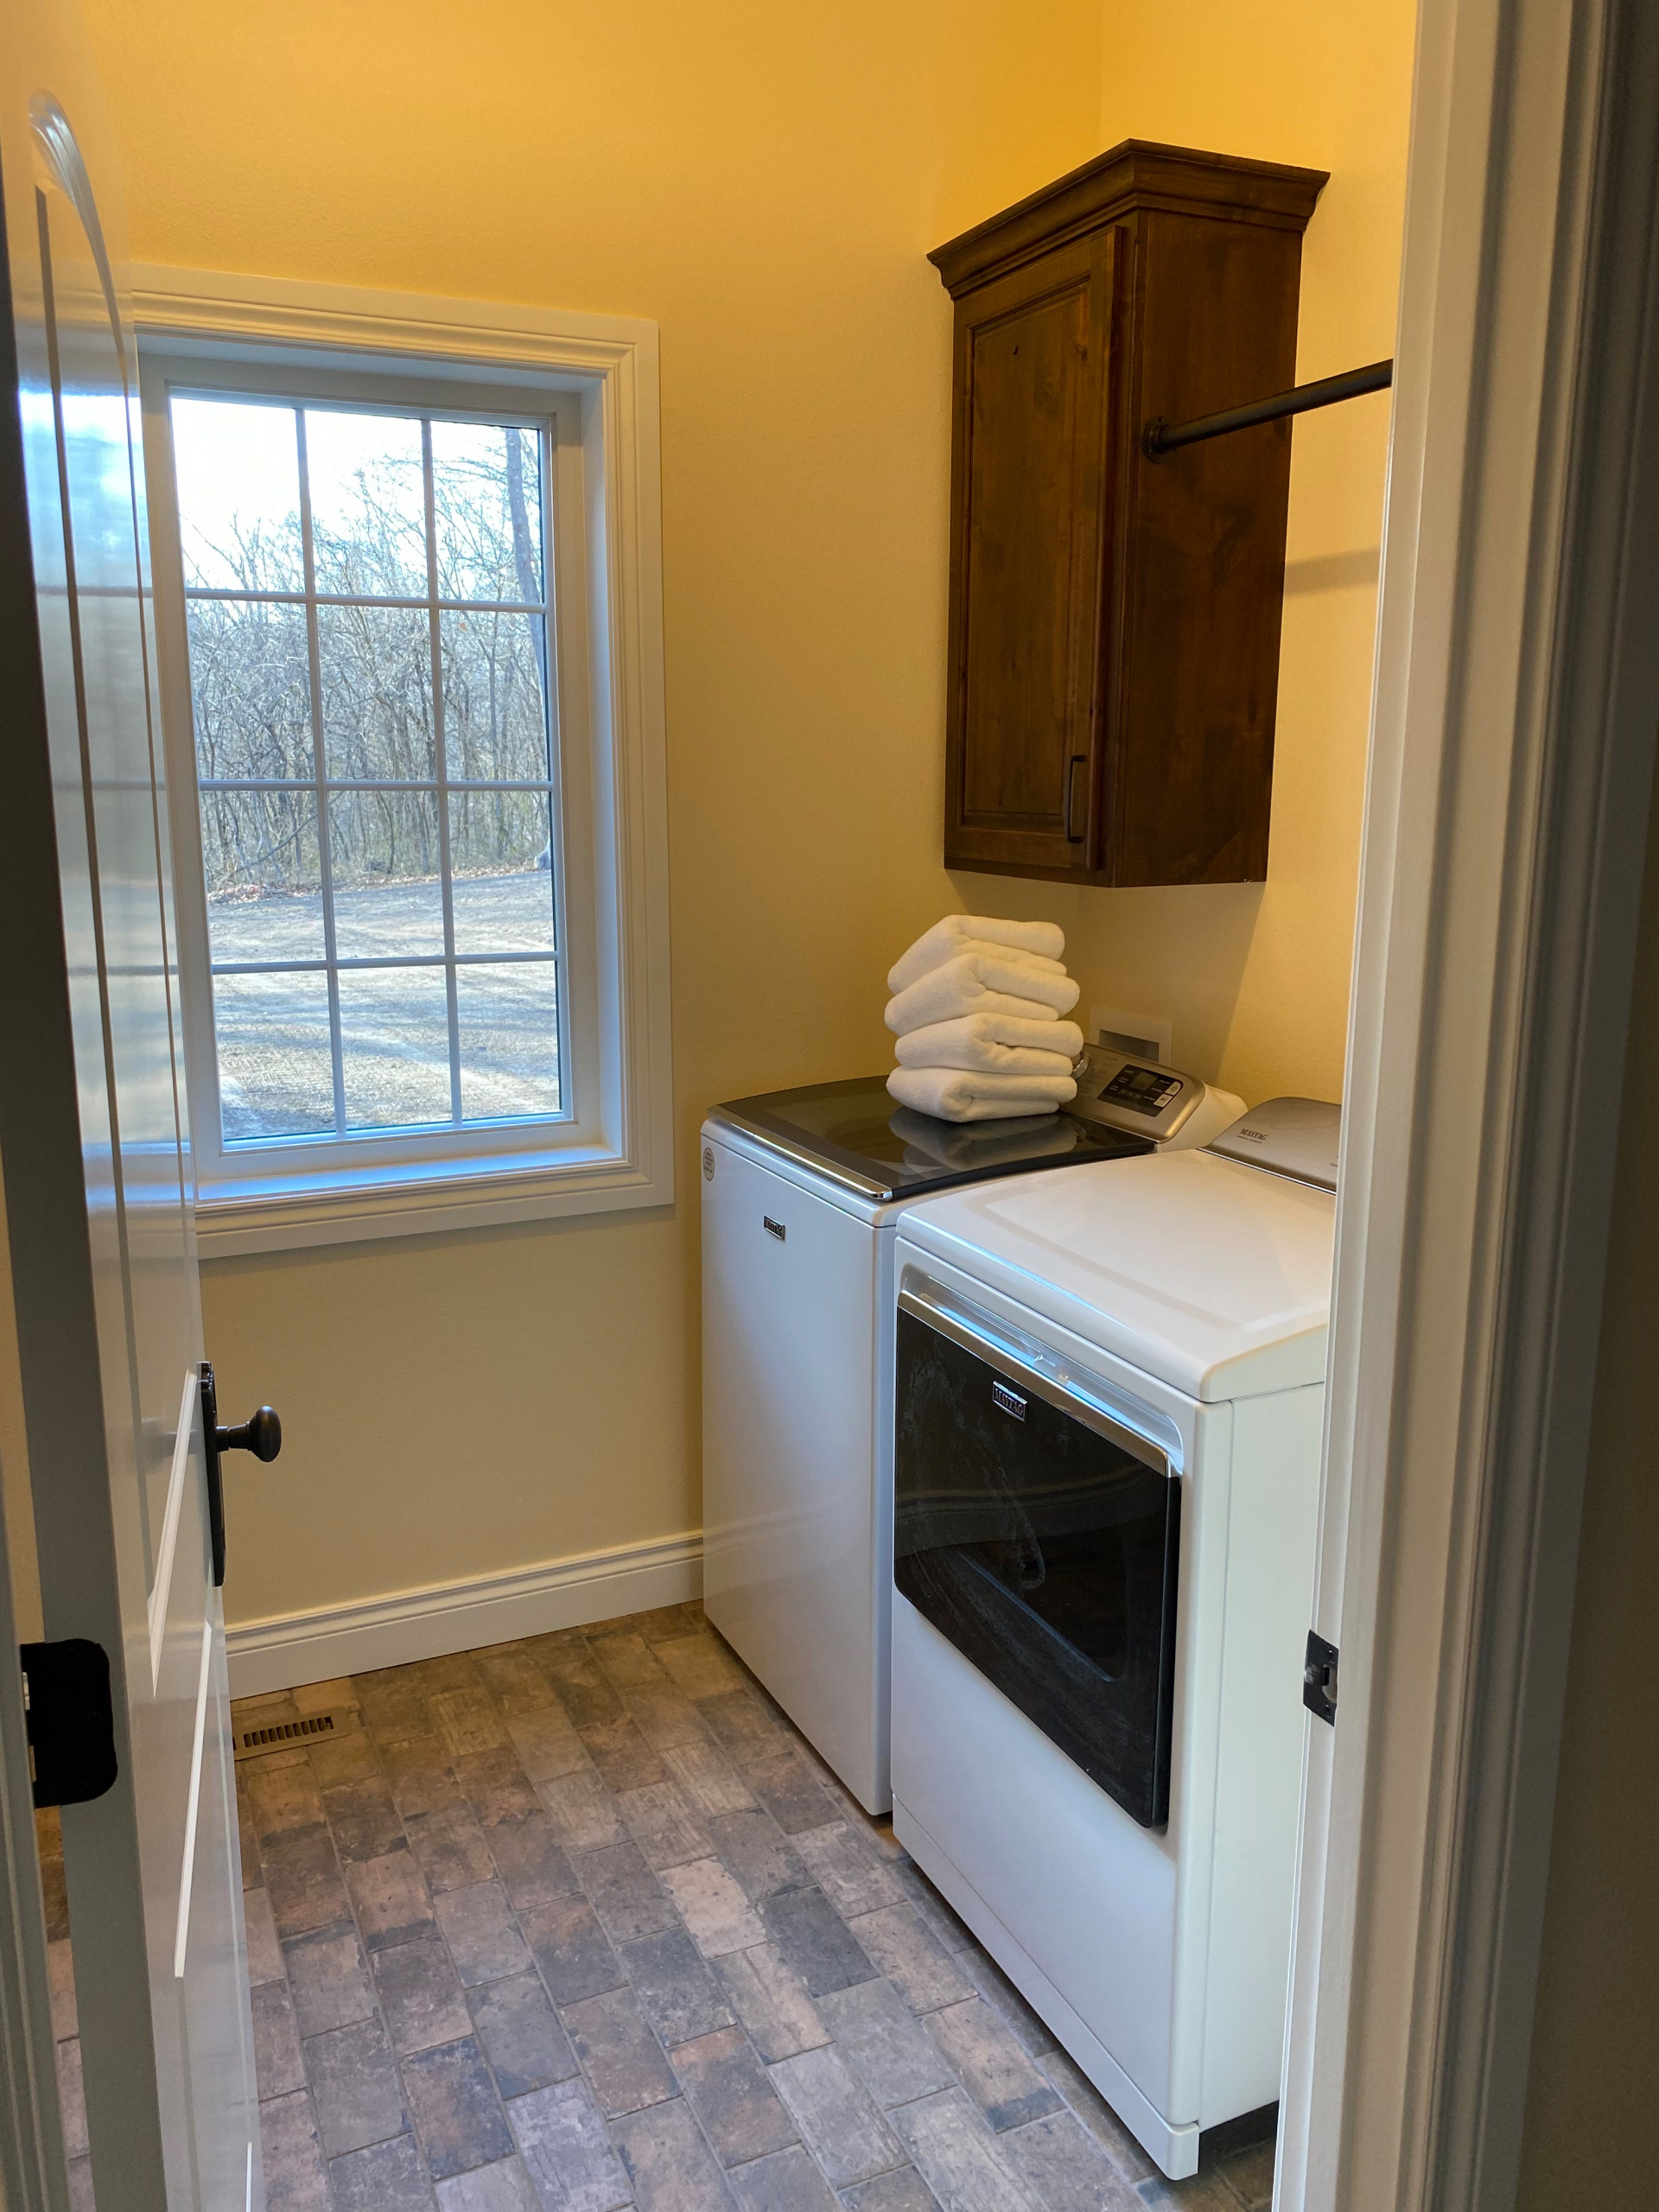 Laundry room with brick tile floor